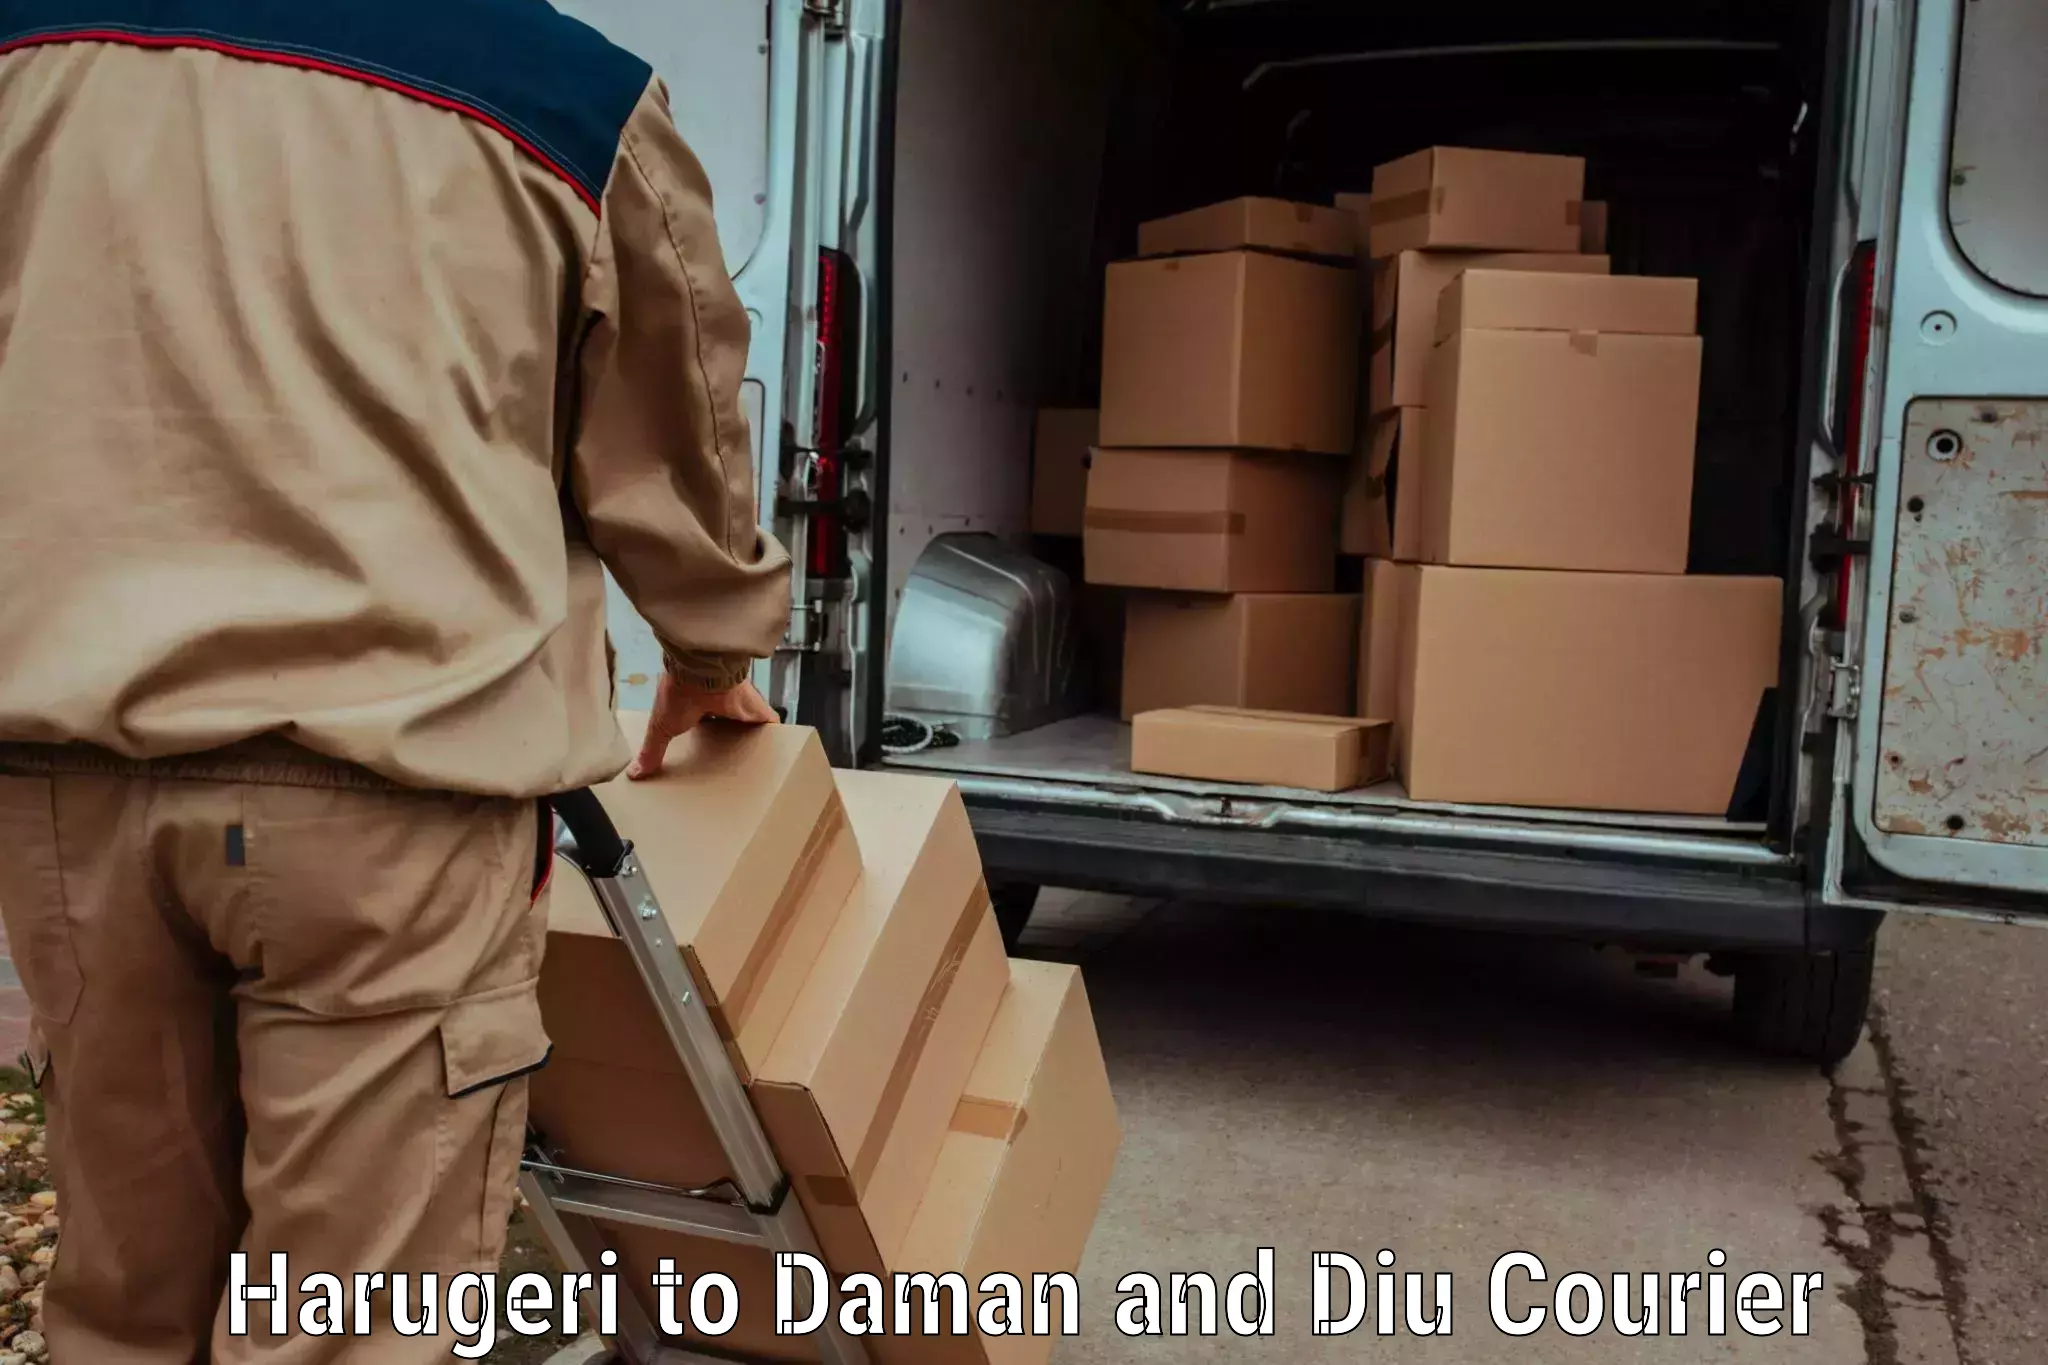 Online courier booking Harugeri to Diu